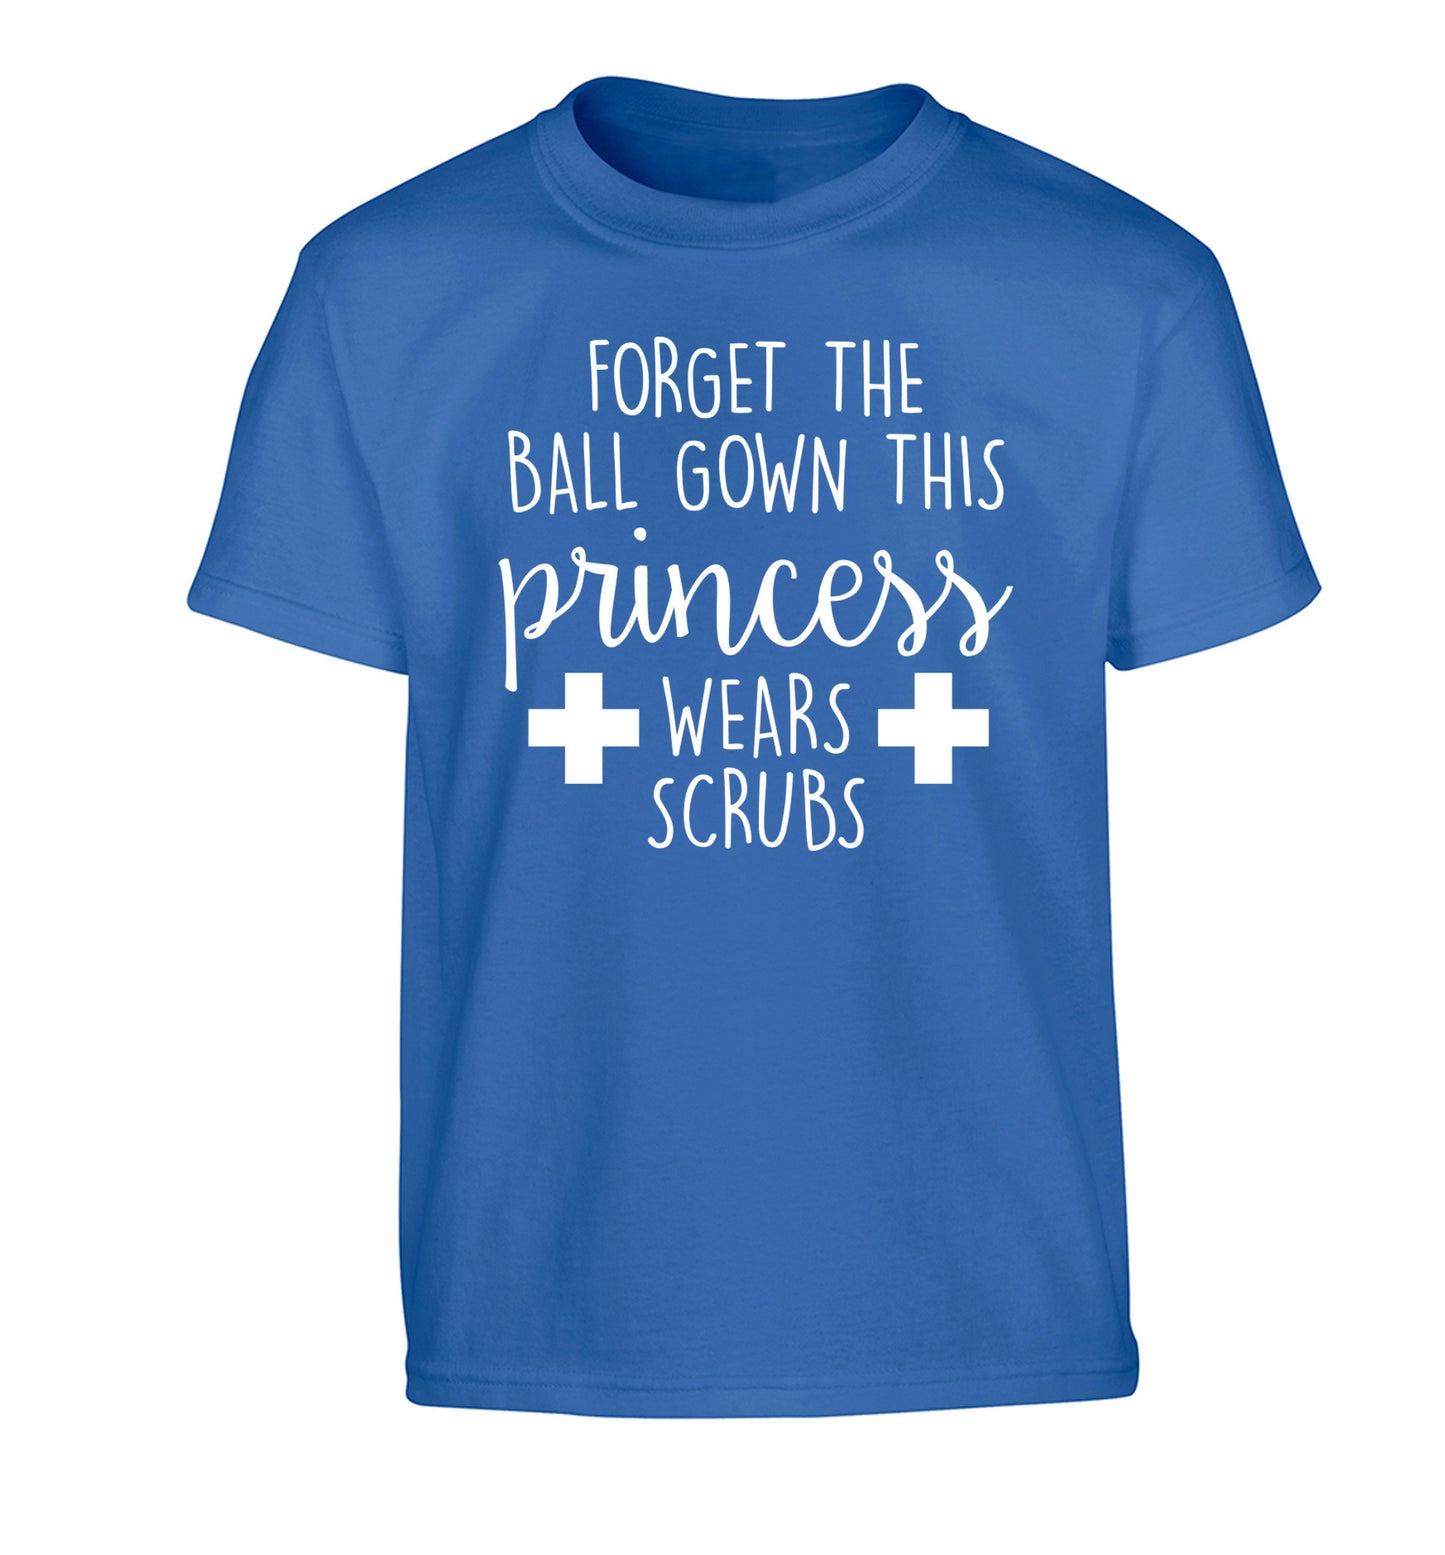 Forget the ball gown this princess wears scrubs Children's blue Tshirt 12-14 Years